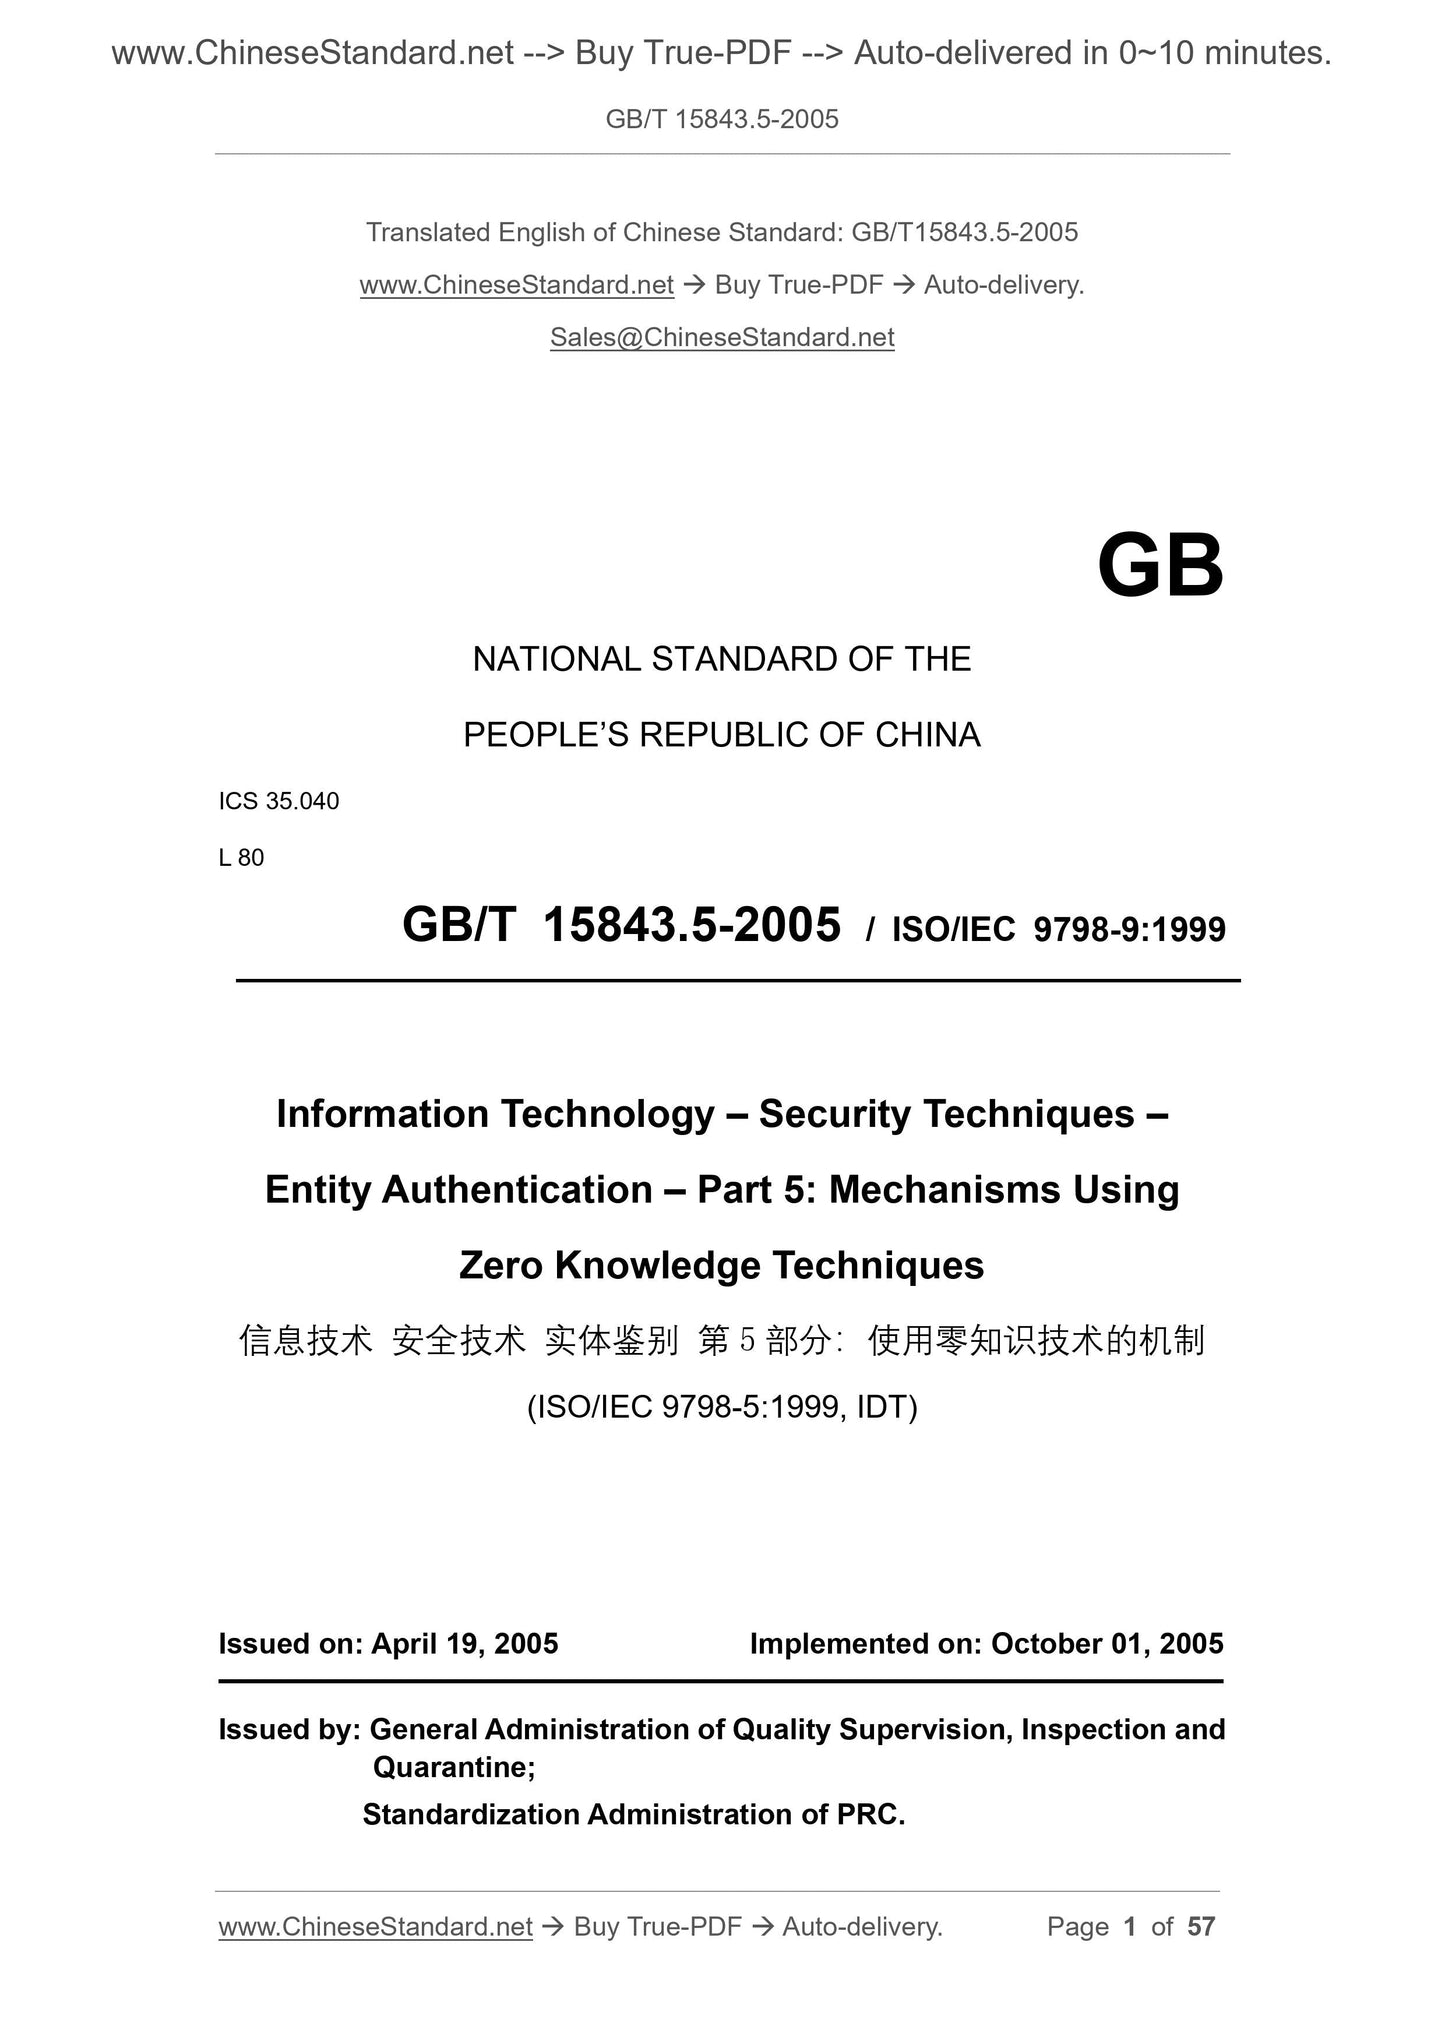 GB/T 15843.5-2005 Page 1